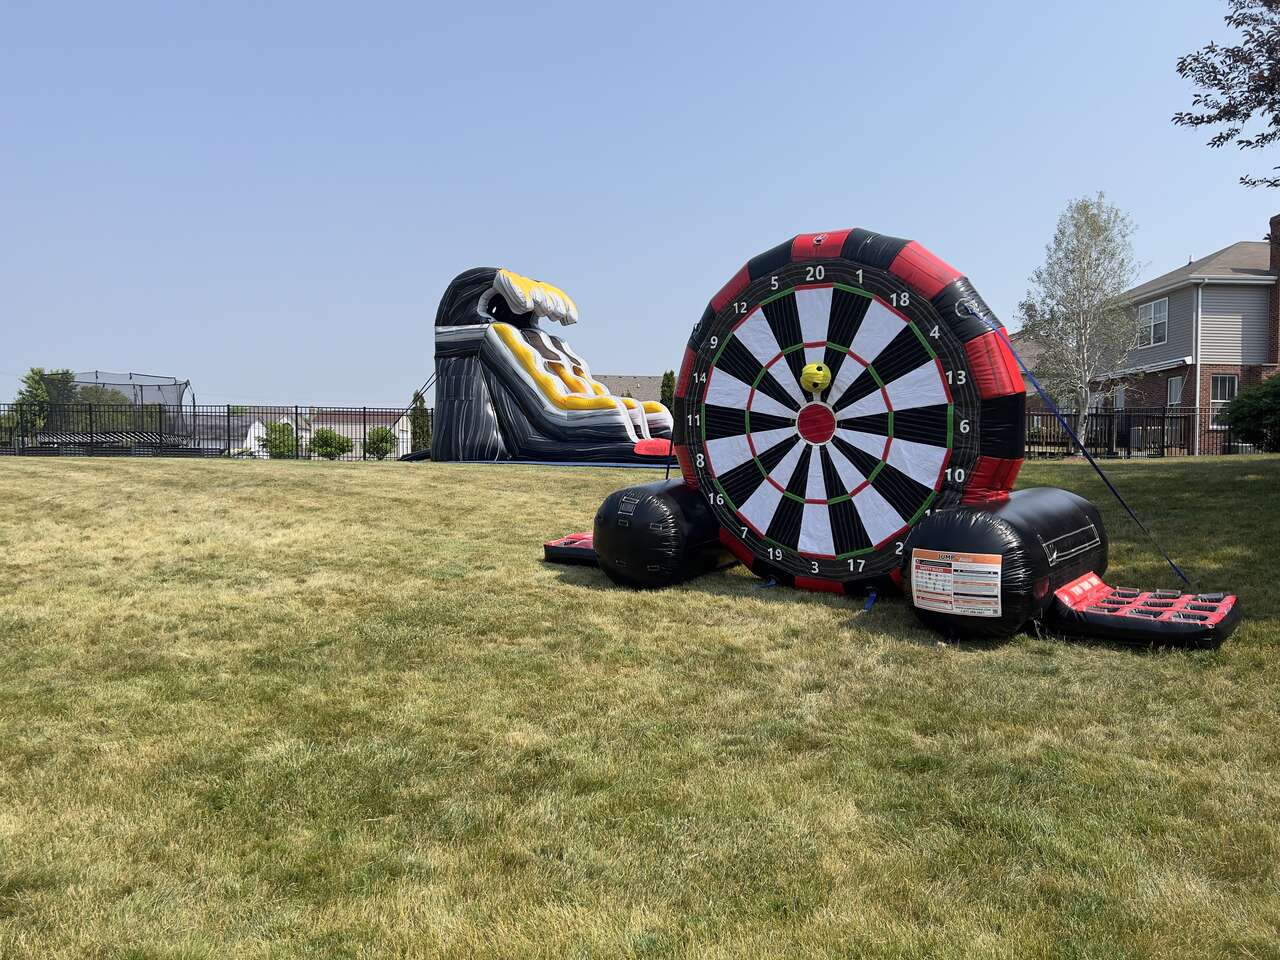 inflatable and bounce house rentals by Fun Bounces Rental in Naperville IL 60563